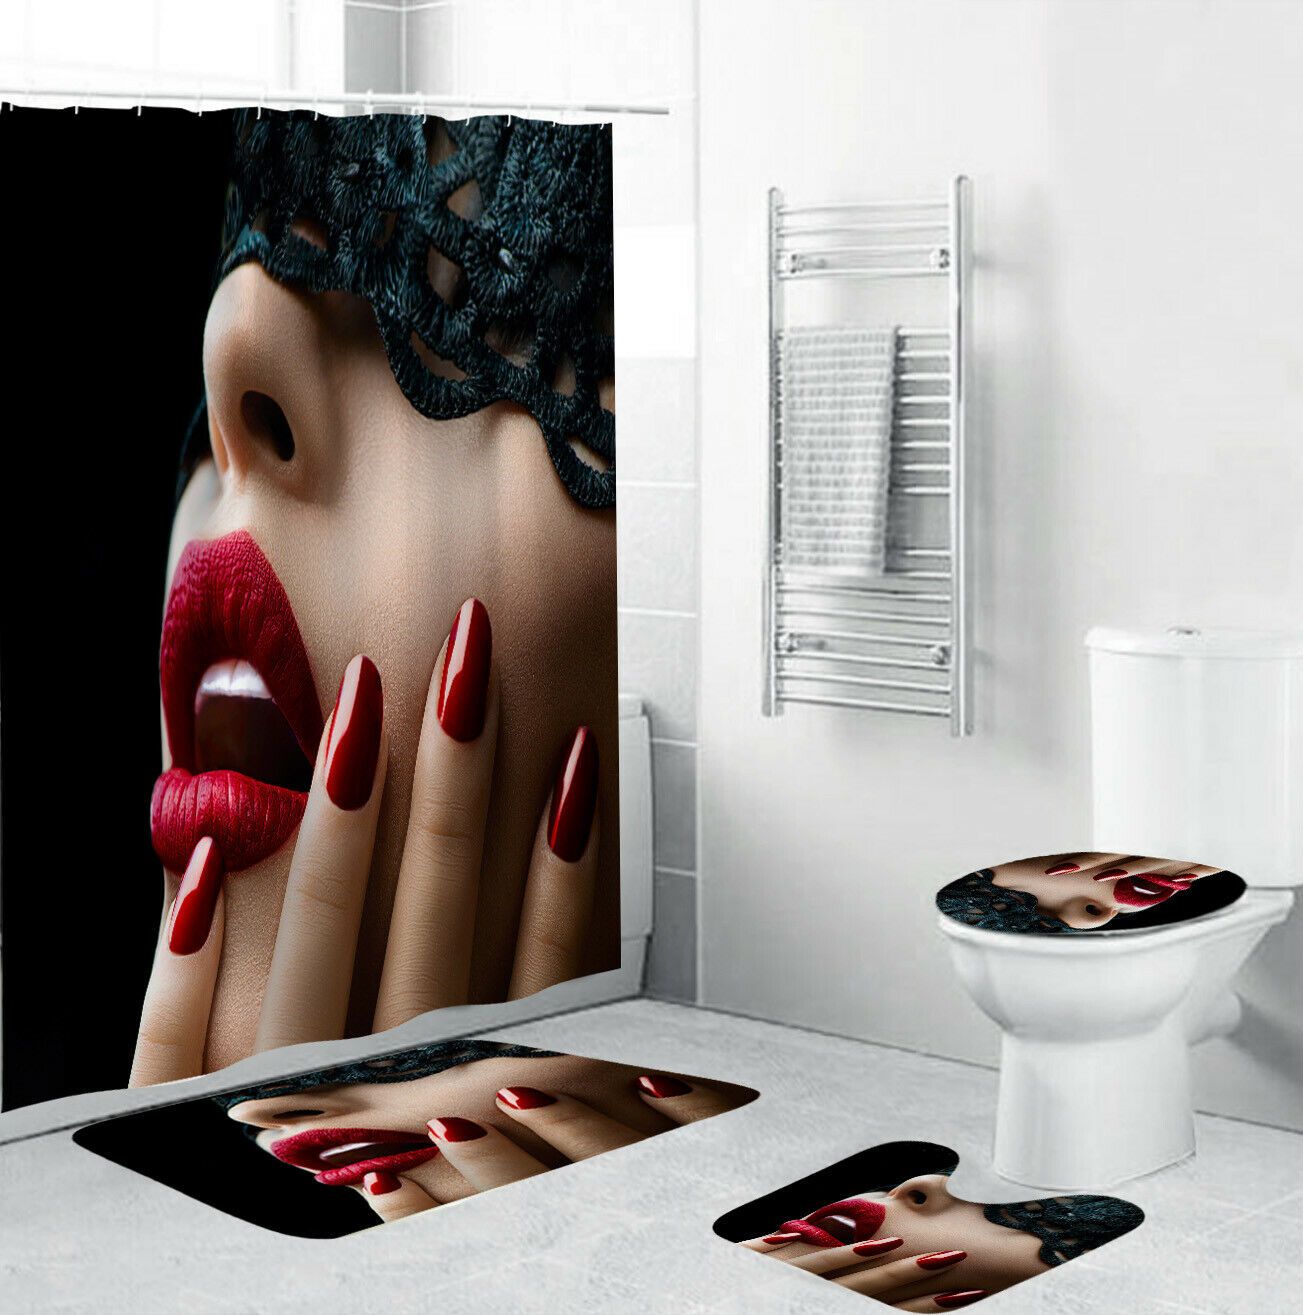 Sexy lady Fabric Shower Curtain for Bathroon-STYLEGOING